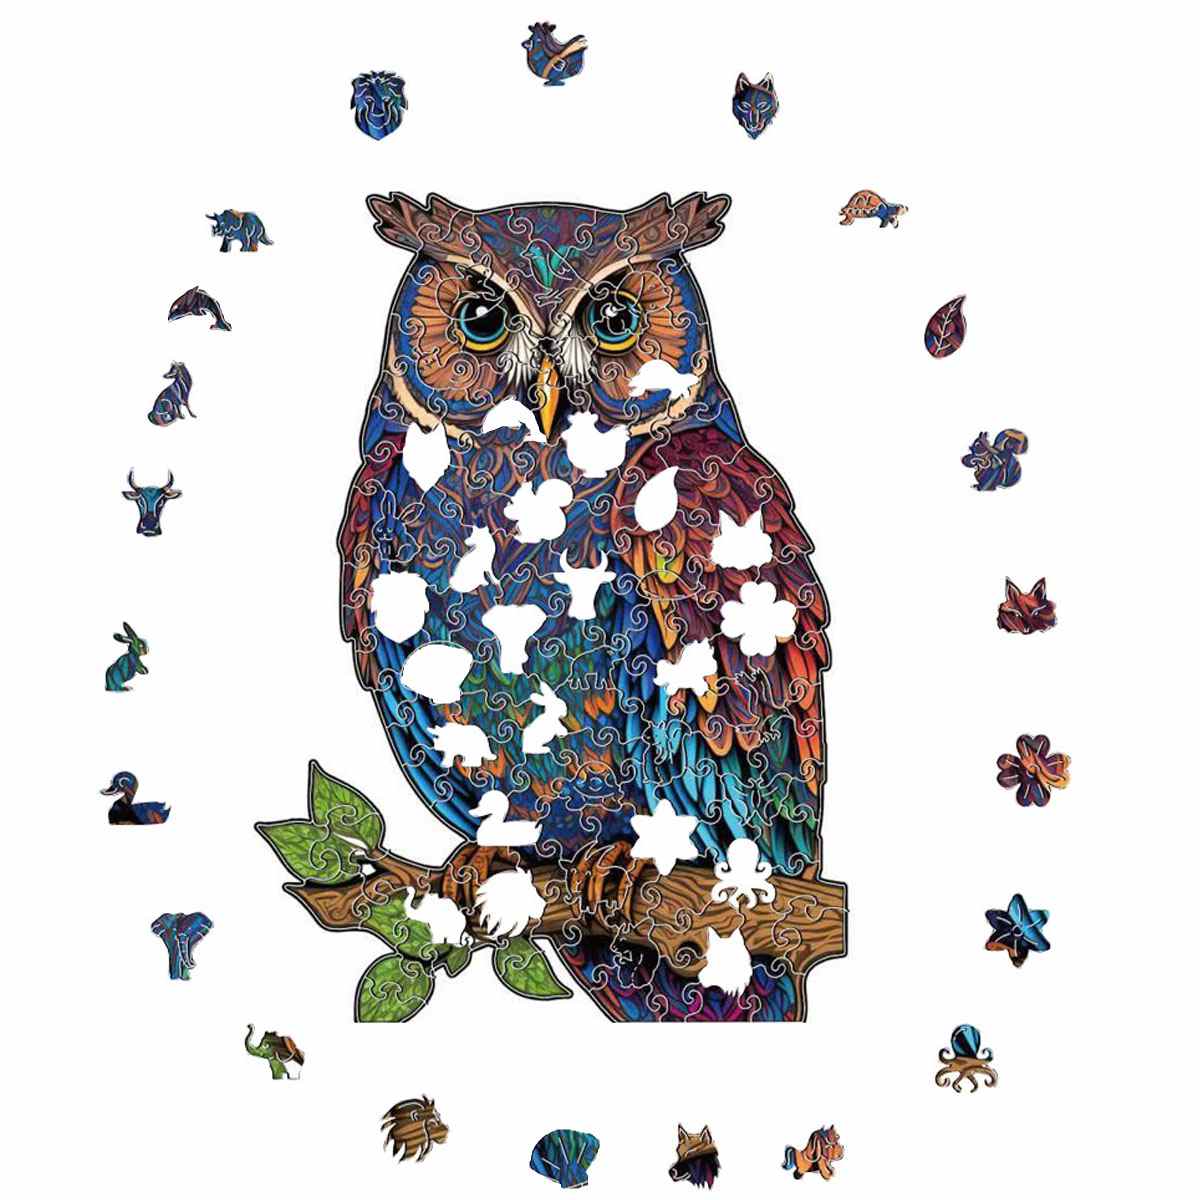 Animal Jigsaw Puzzle > Wooden Jigsaw Puzzle > Jigsaw Puzzle Wisdom Owl - Jigsaw Puzzle